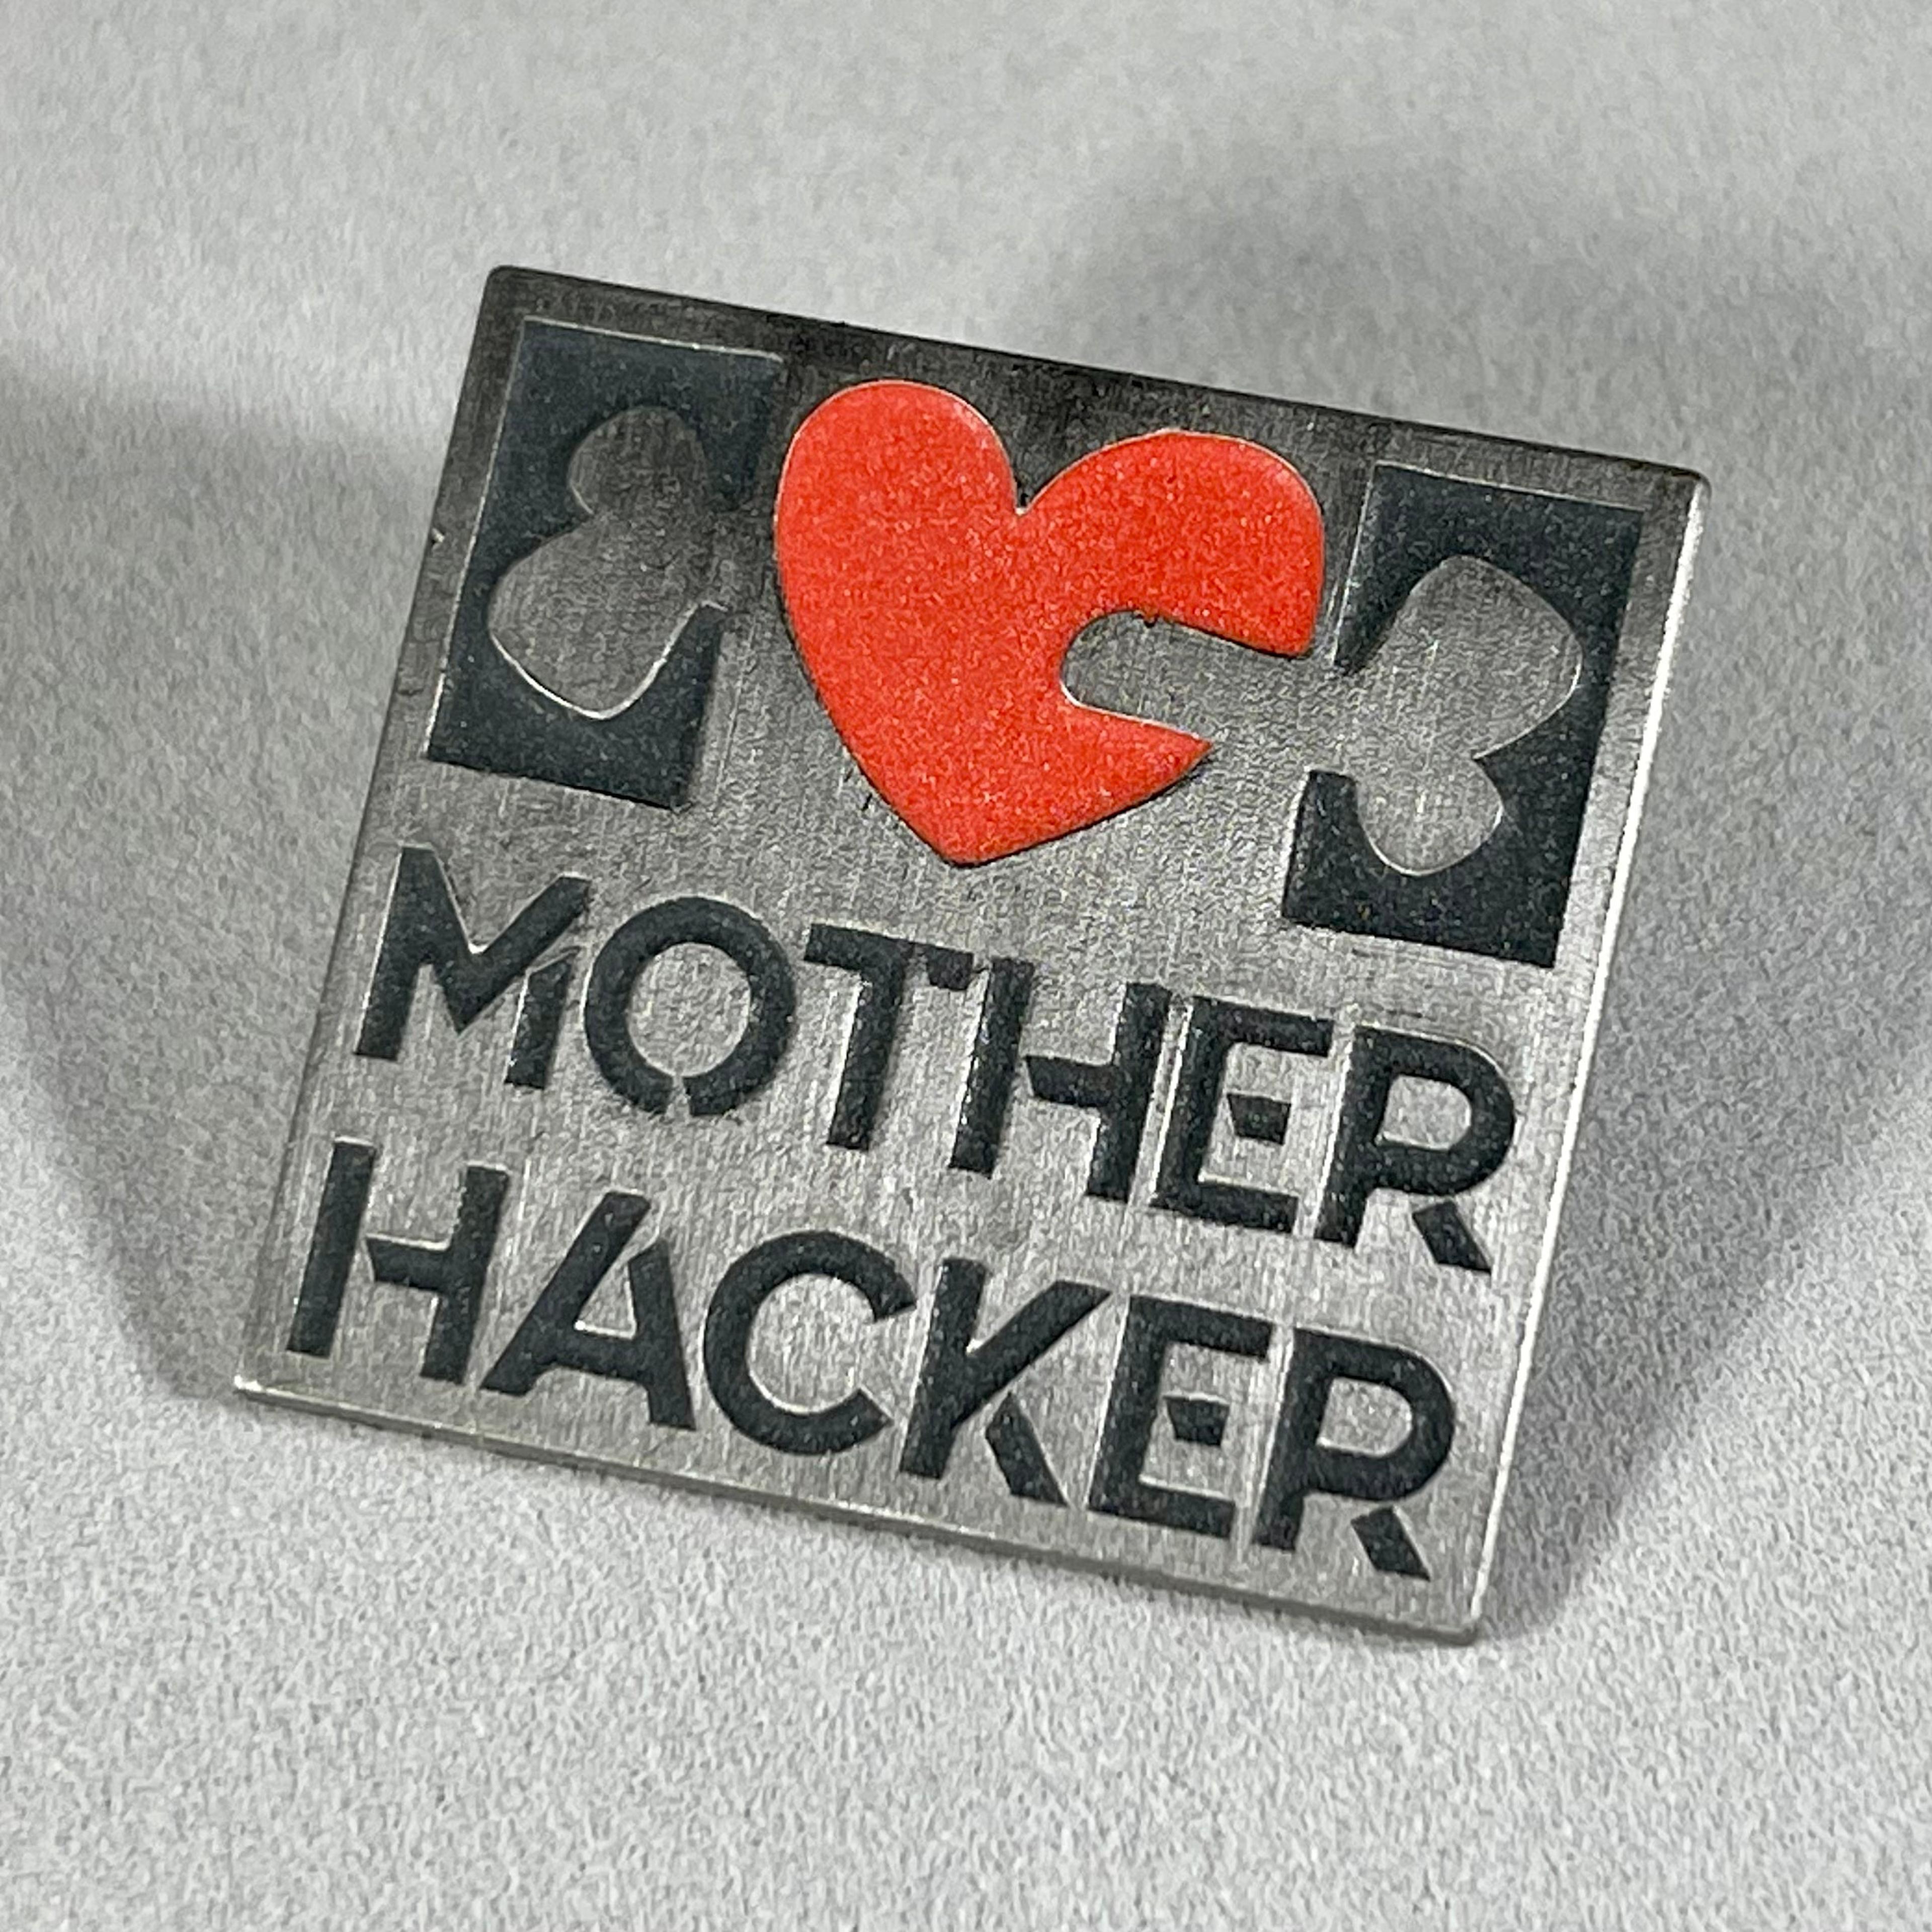 01 - Motherhacker Haters Club Membership (Comes with a Pin)